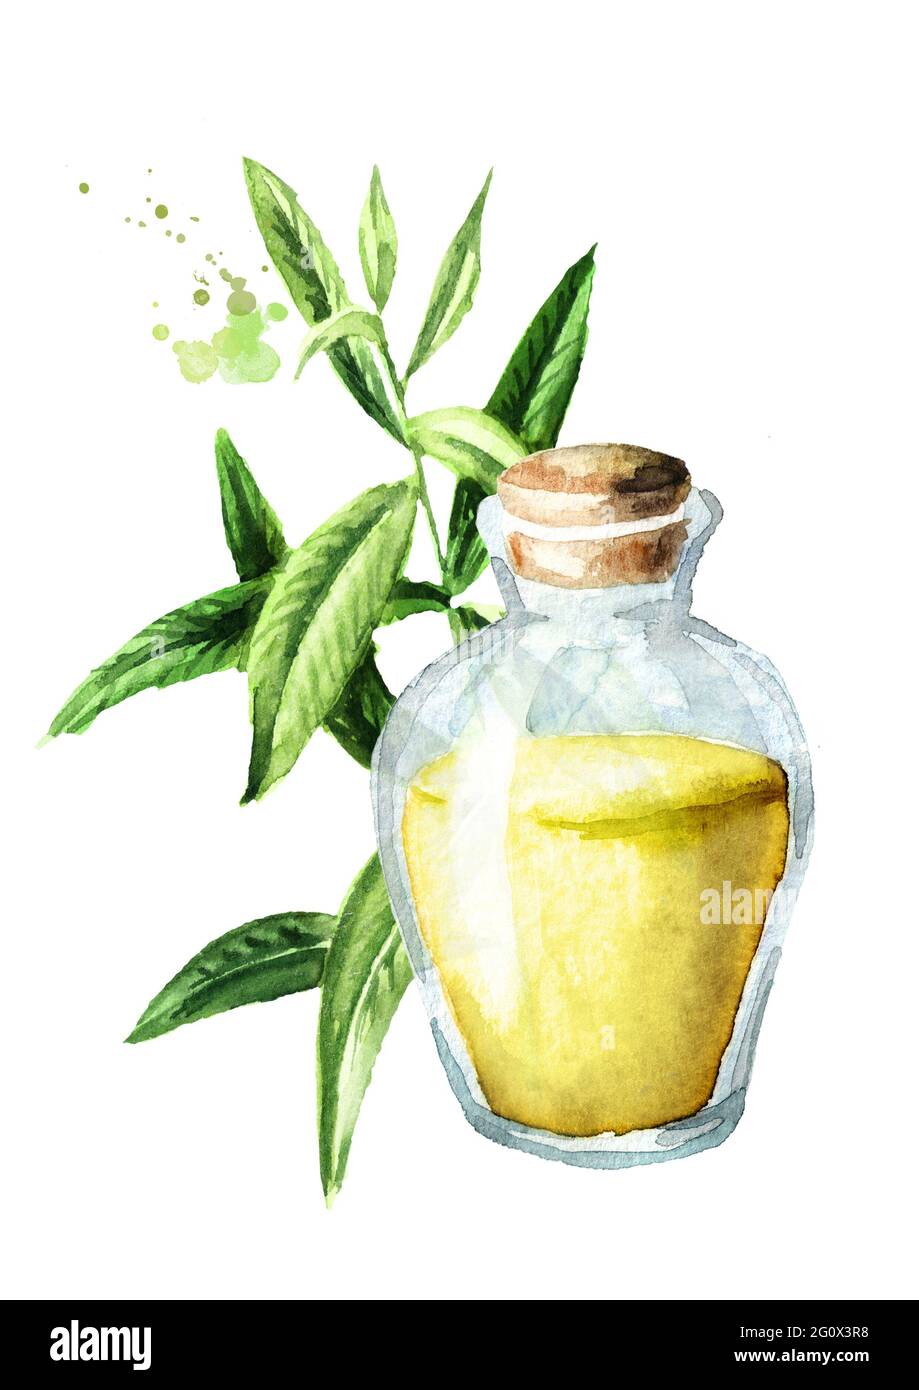 Lemon verbena essential oil. Watercolor hand drawn illustration isolated on white background Stock Photo